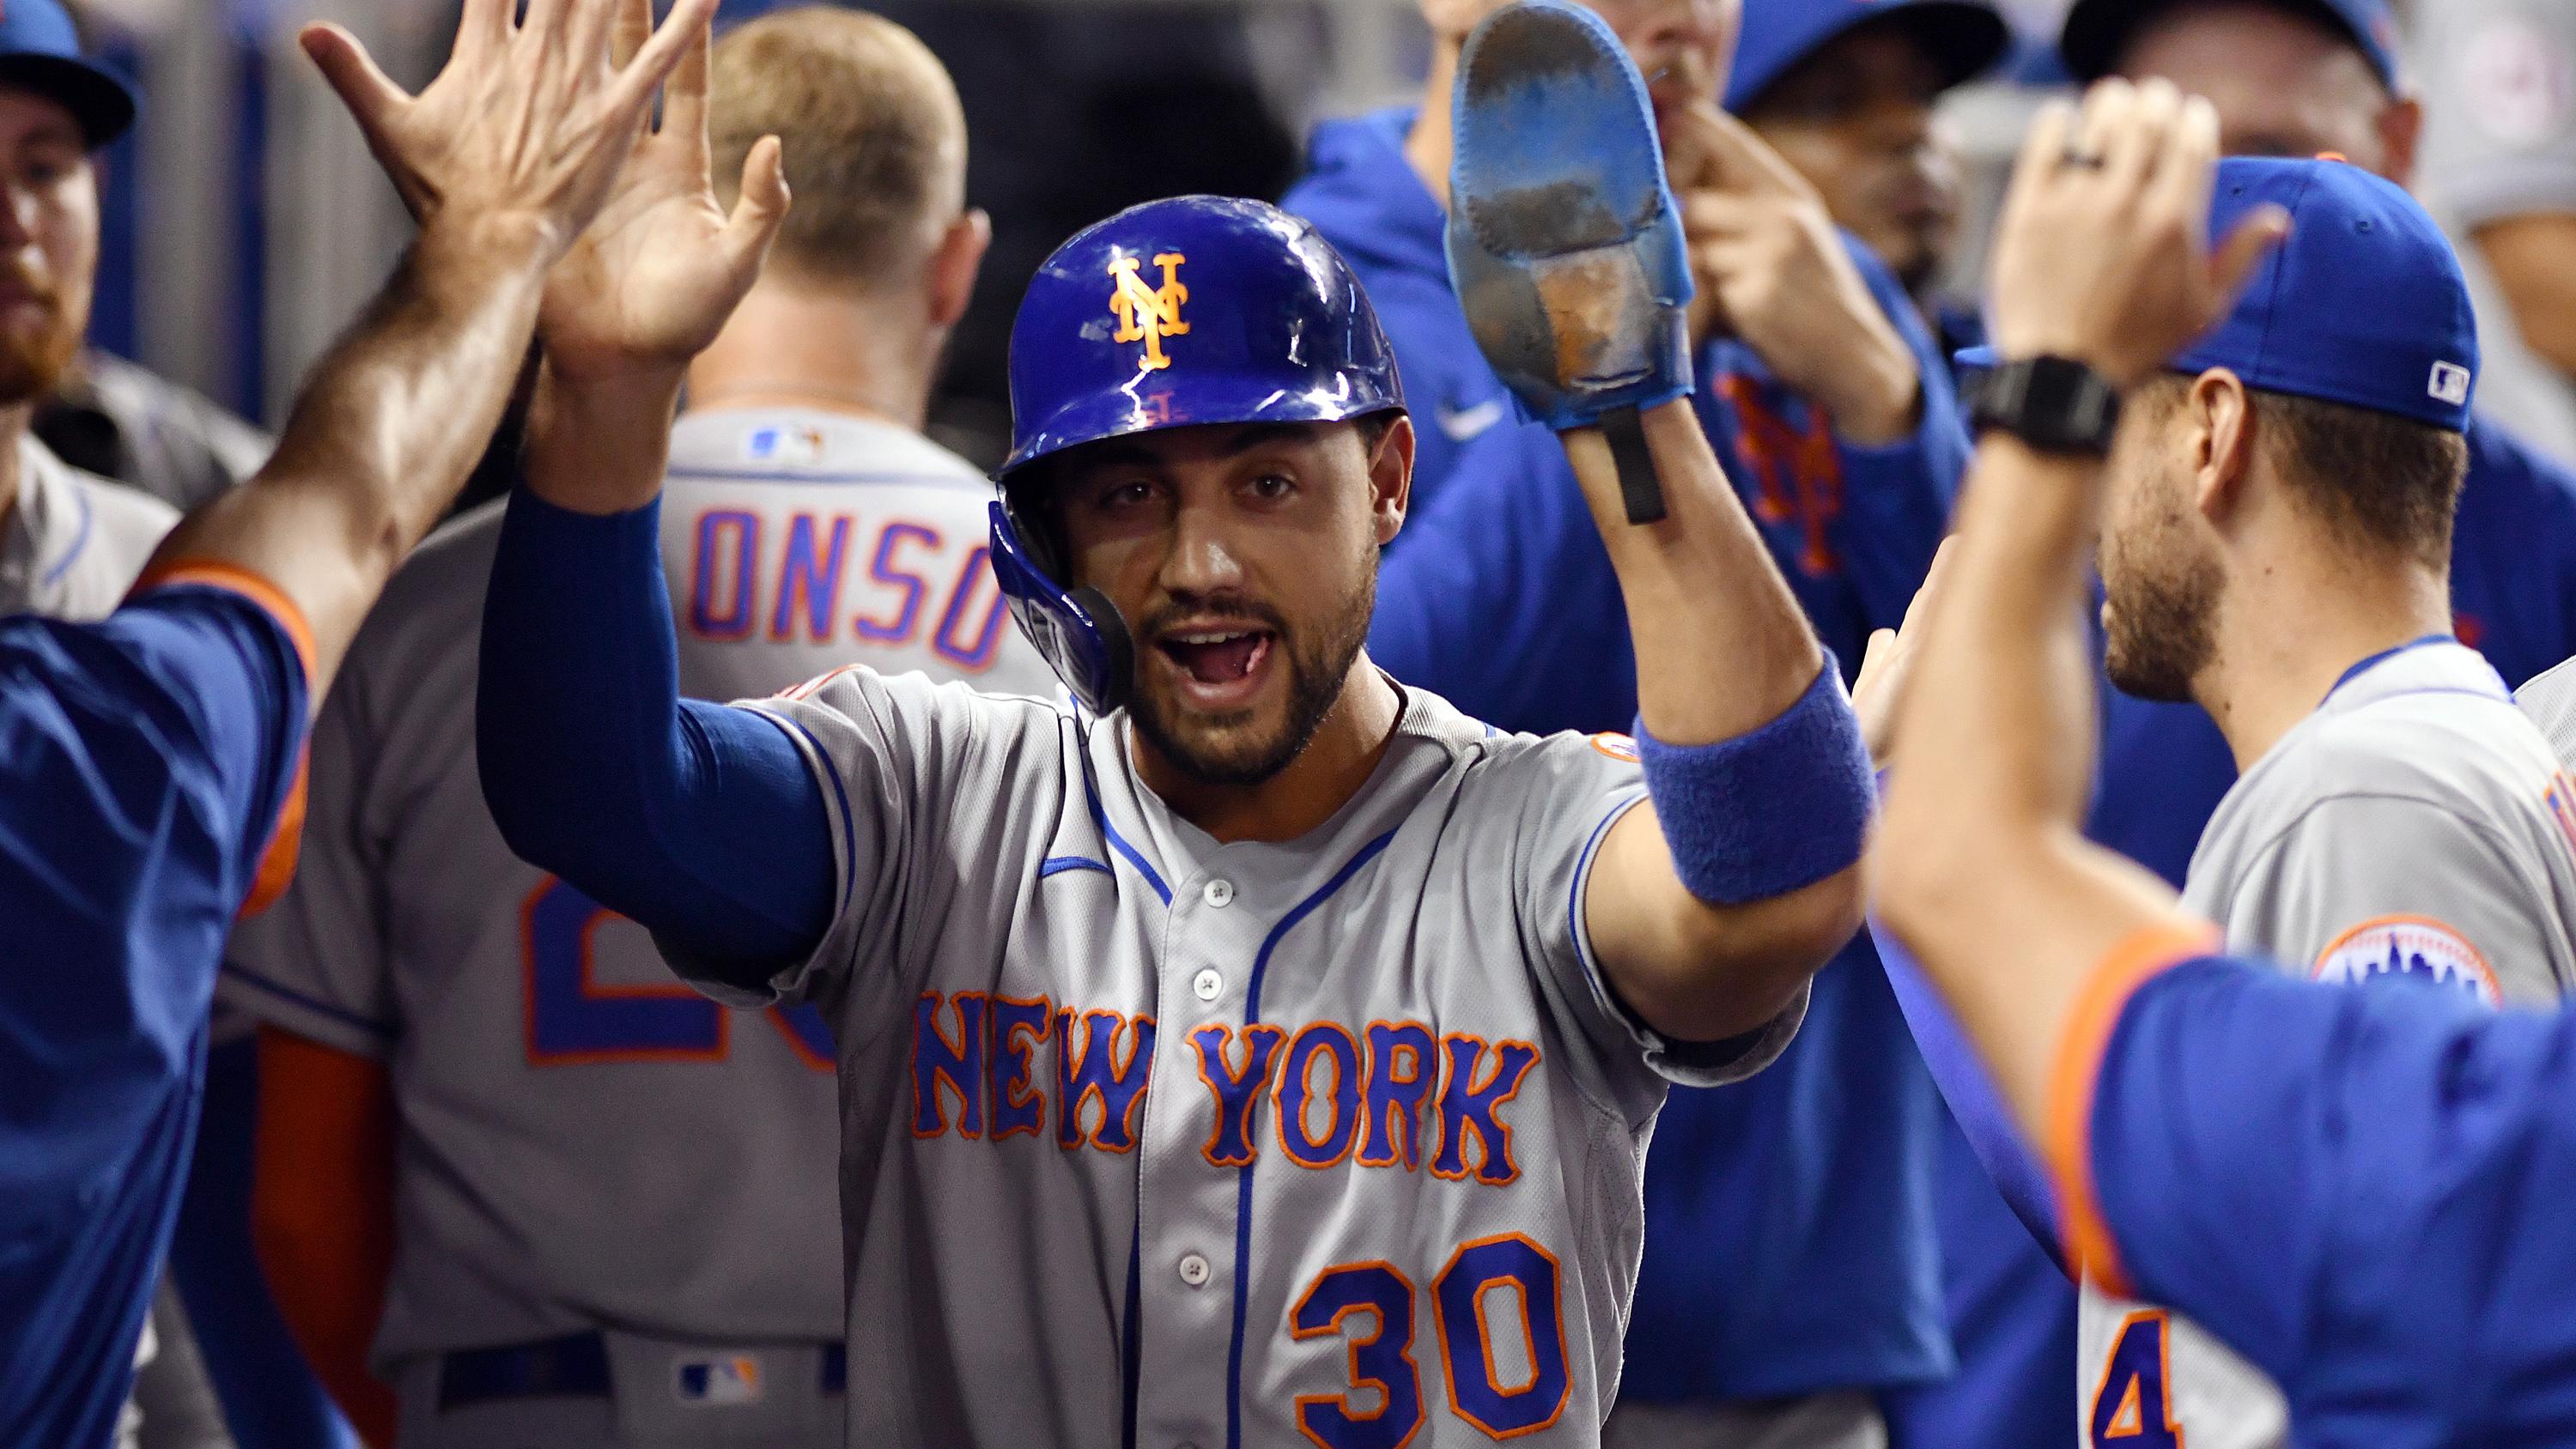 Aug 4, 2021; Miami, Florida, USA; New York Mets right fielder Michael Conforto (30) celebrates with teammates after scoring a run against the Miami Marlins in the second inning at loanDepot Park. / Jim Rassol-USA TODAY Sports